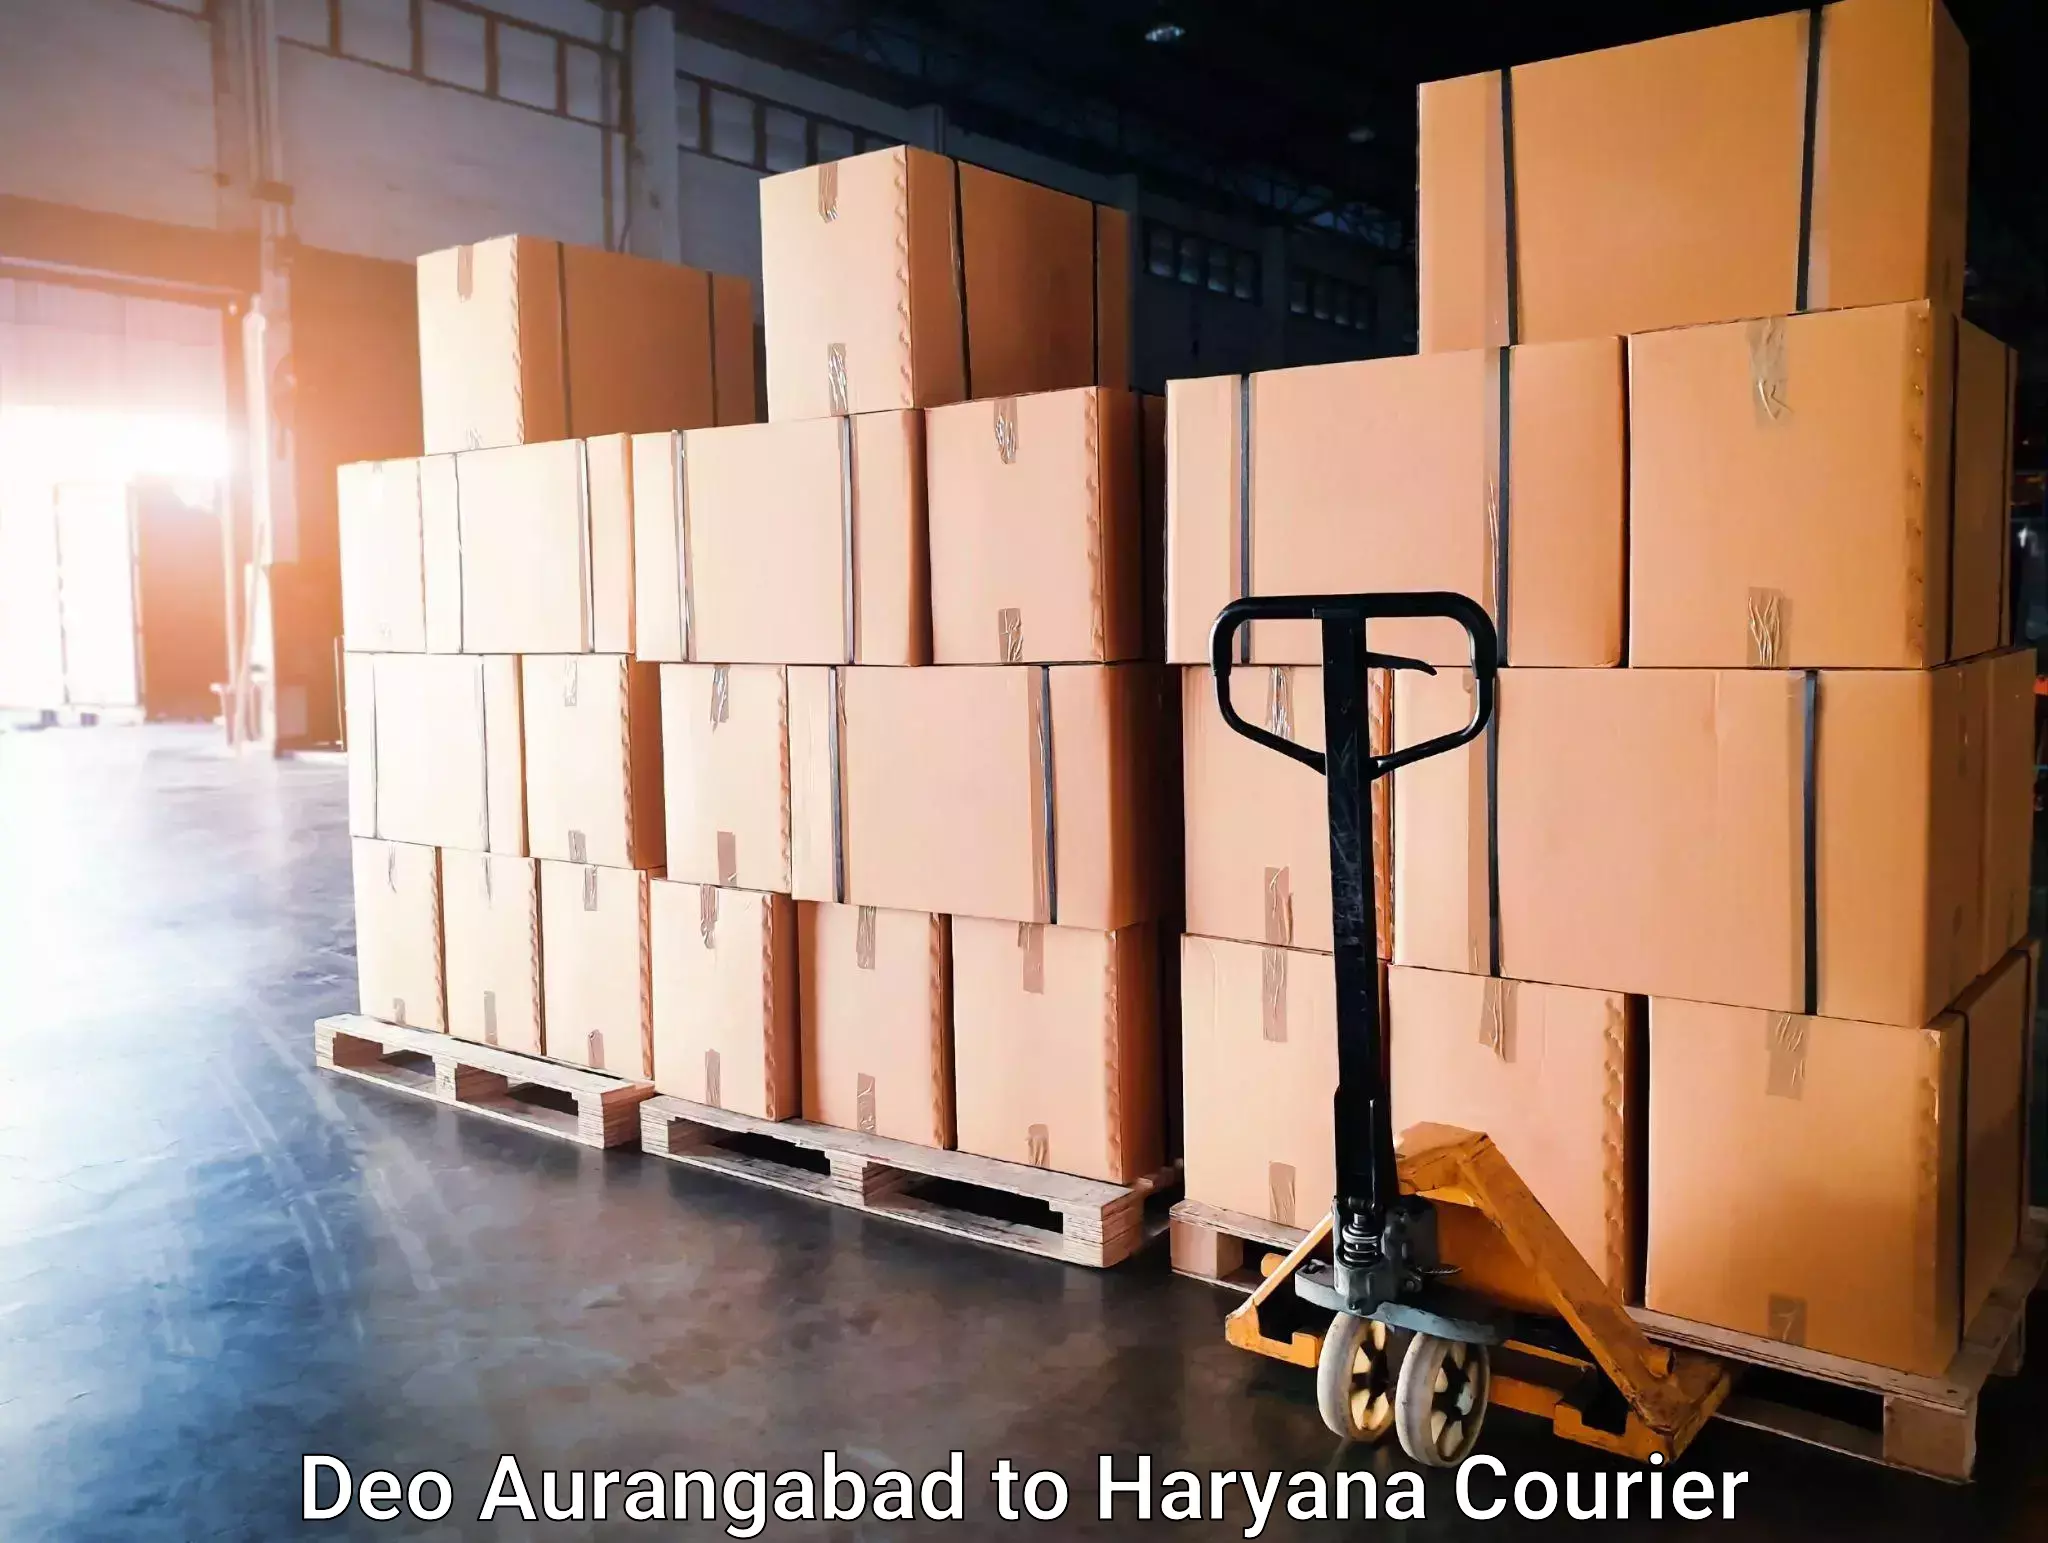 Efficient relocation services Deo Aurangabad to Chaudhary Charan Singh Haryana Agricultural University Hisar